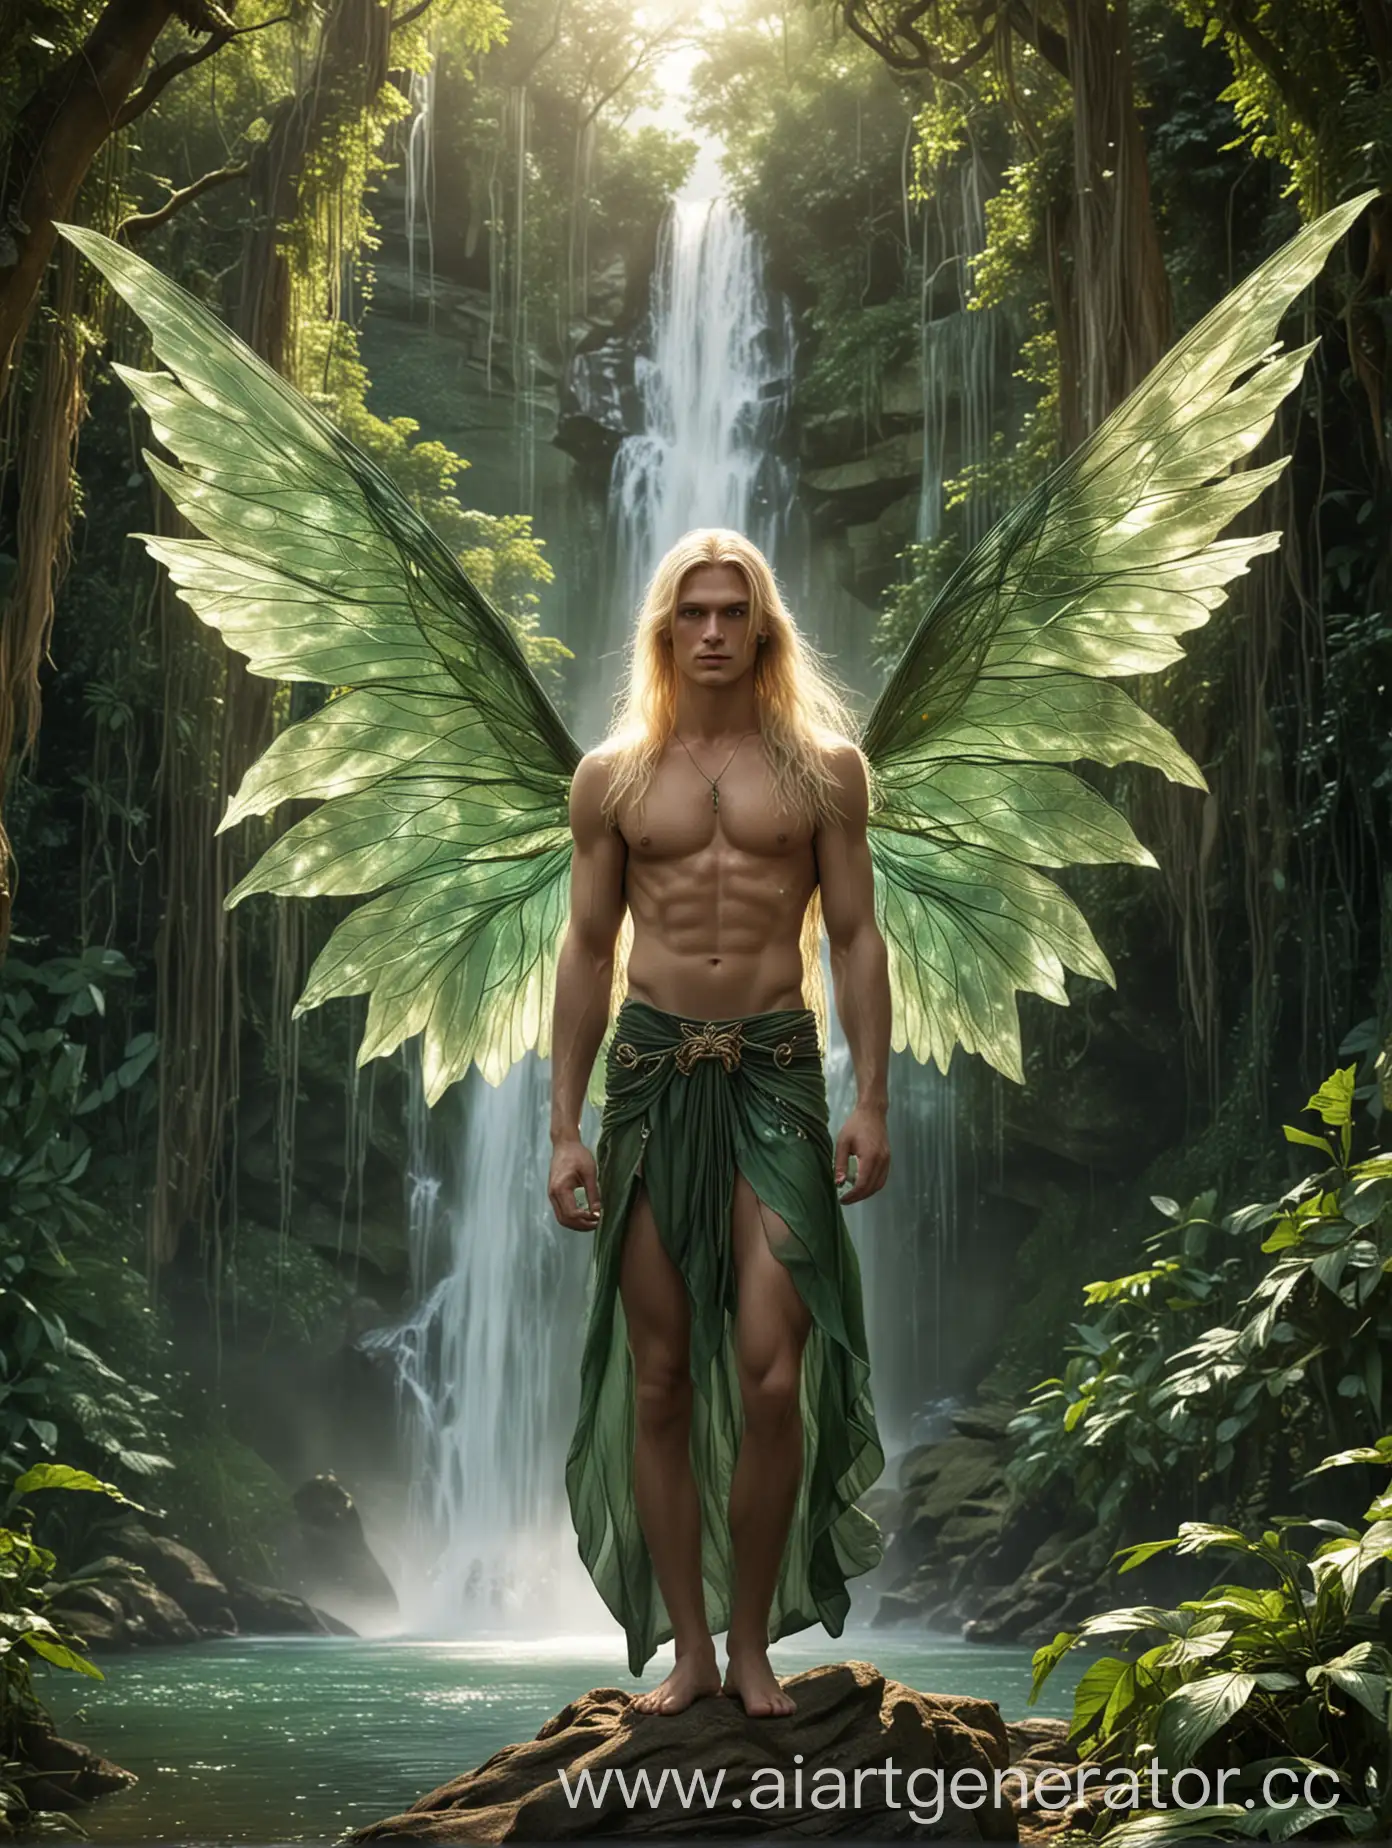 Enchanting-Fairy-Man-with-Emerald-Eyes-in-Lush-Jungle-Setting